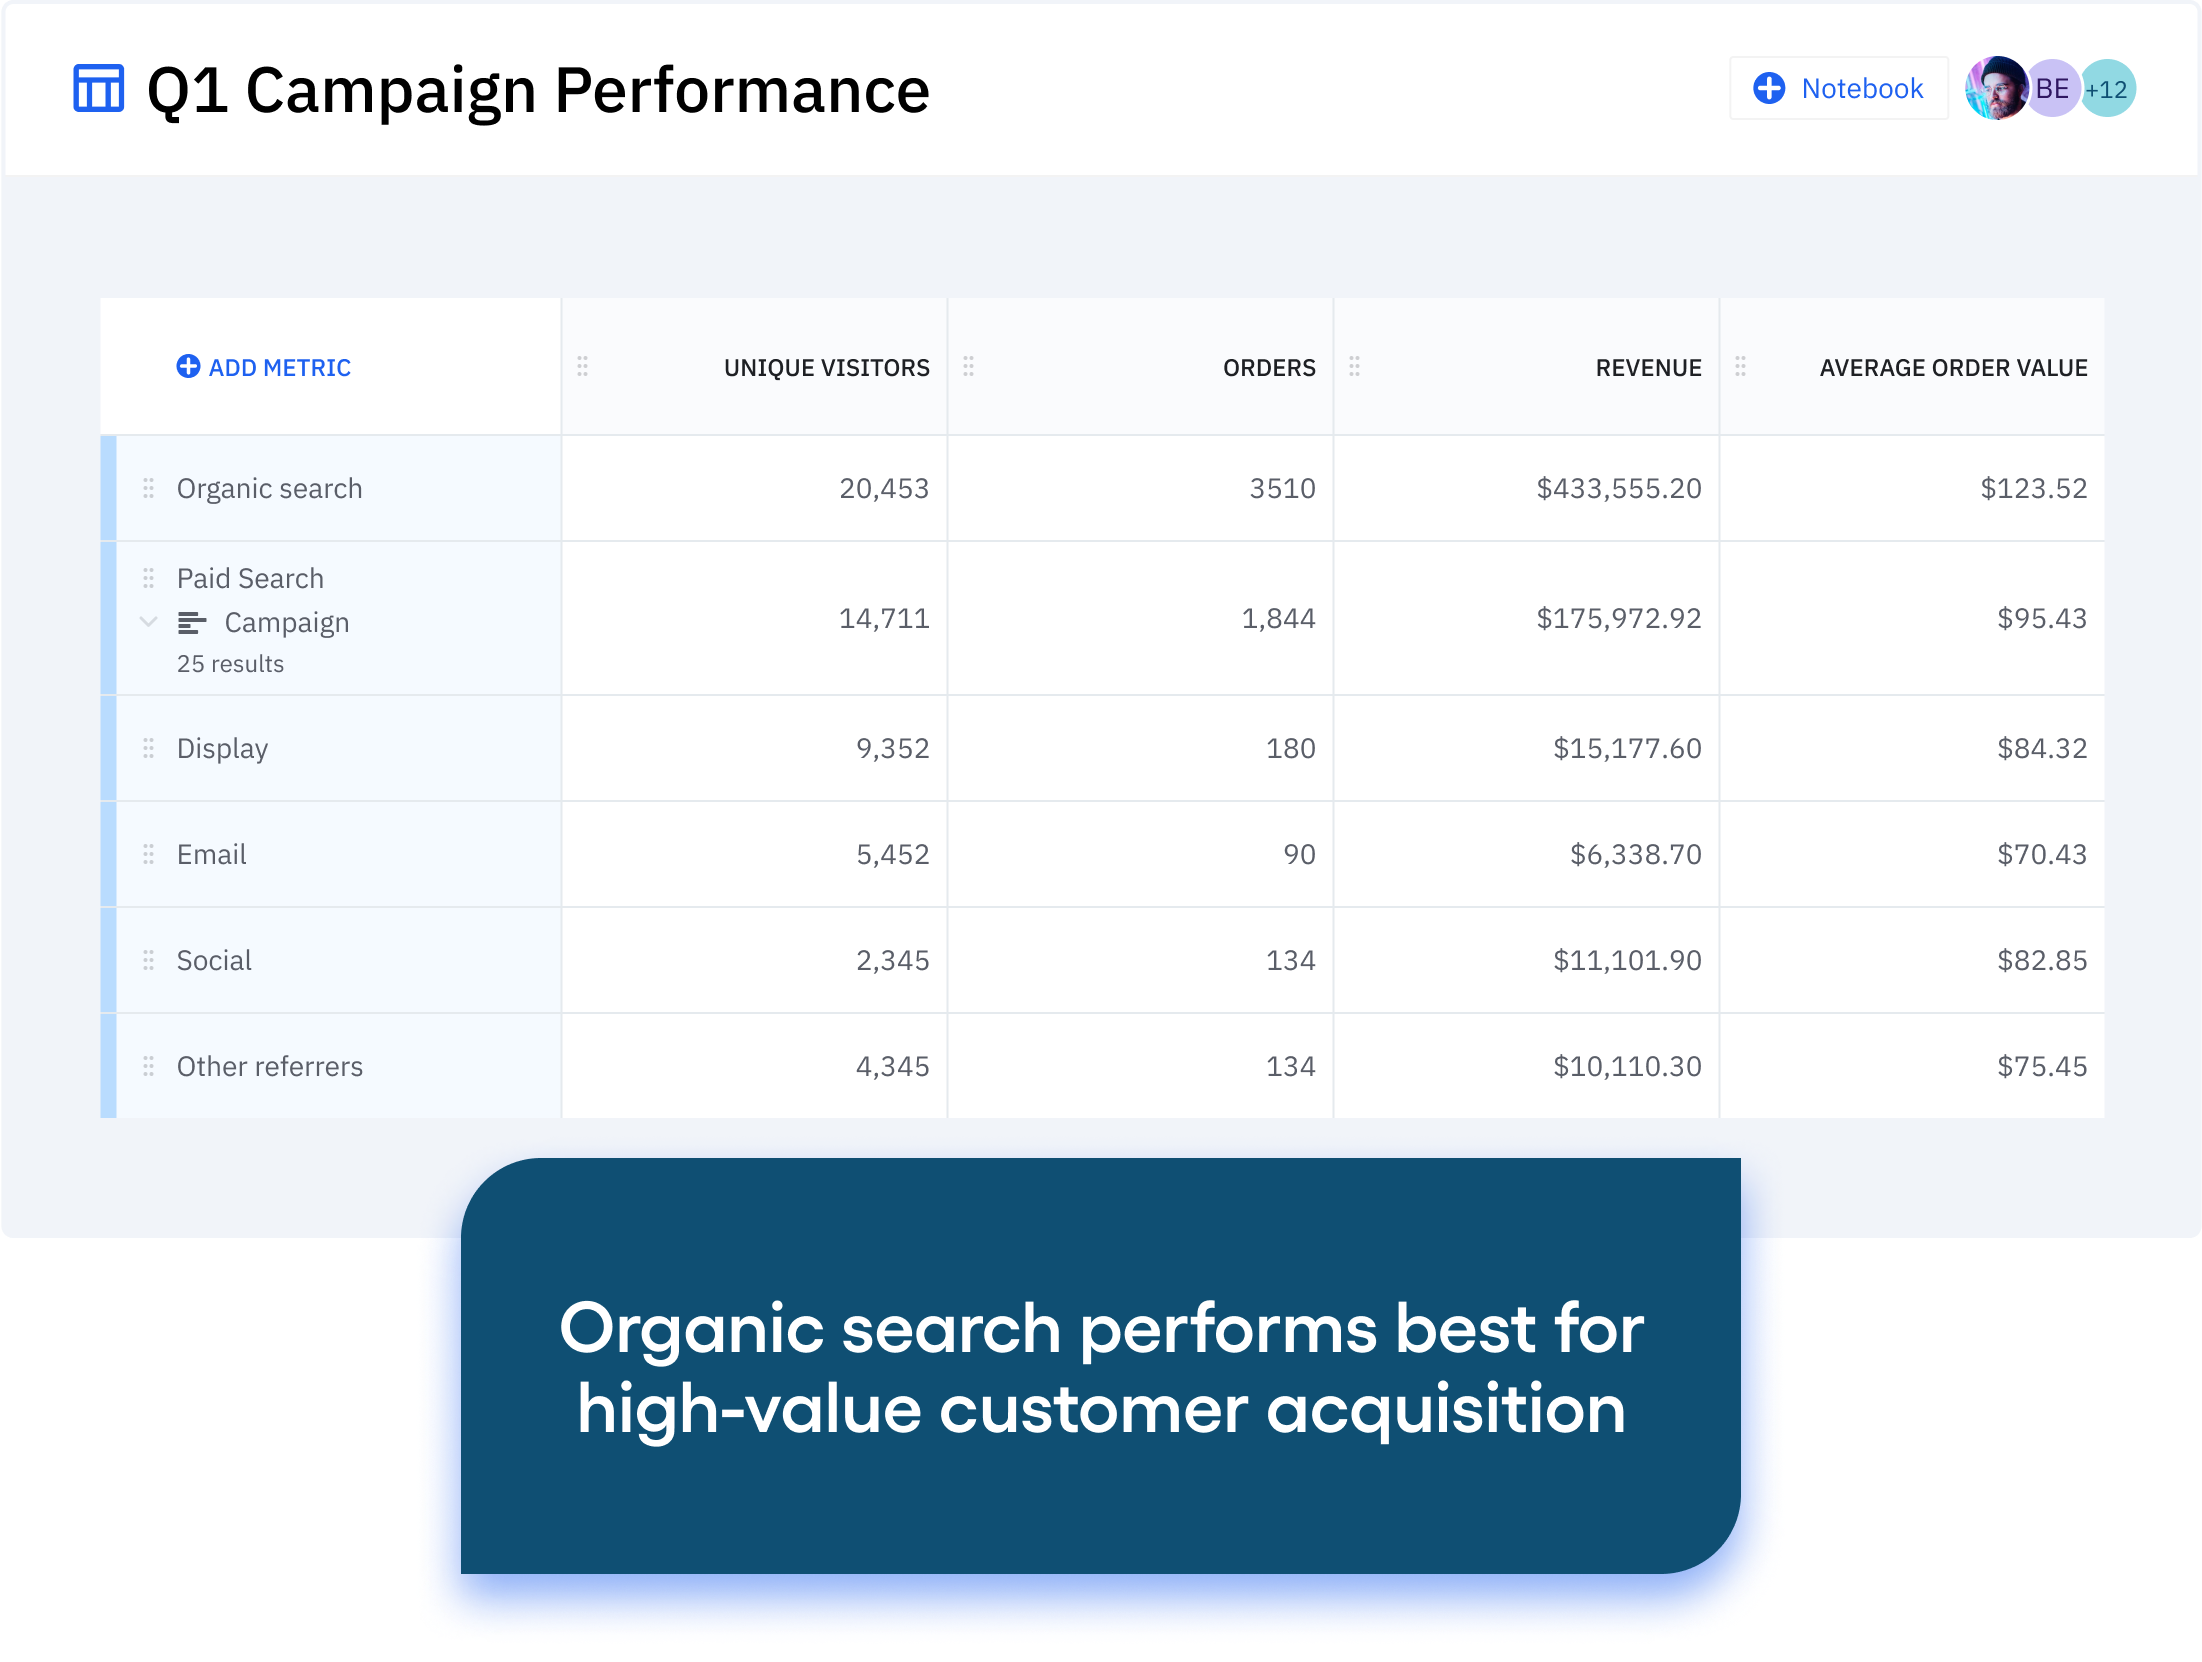 Data tables make it easy to view popular customer acquisition channels